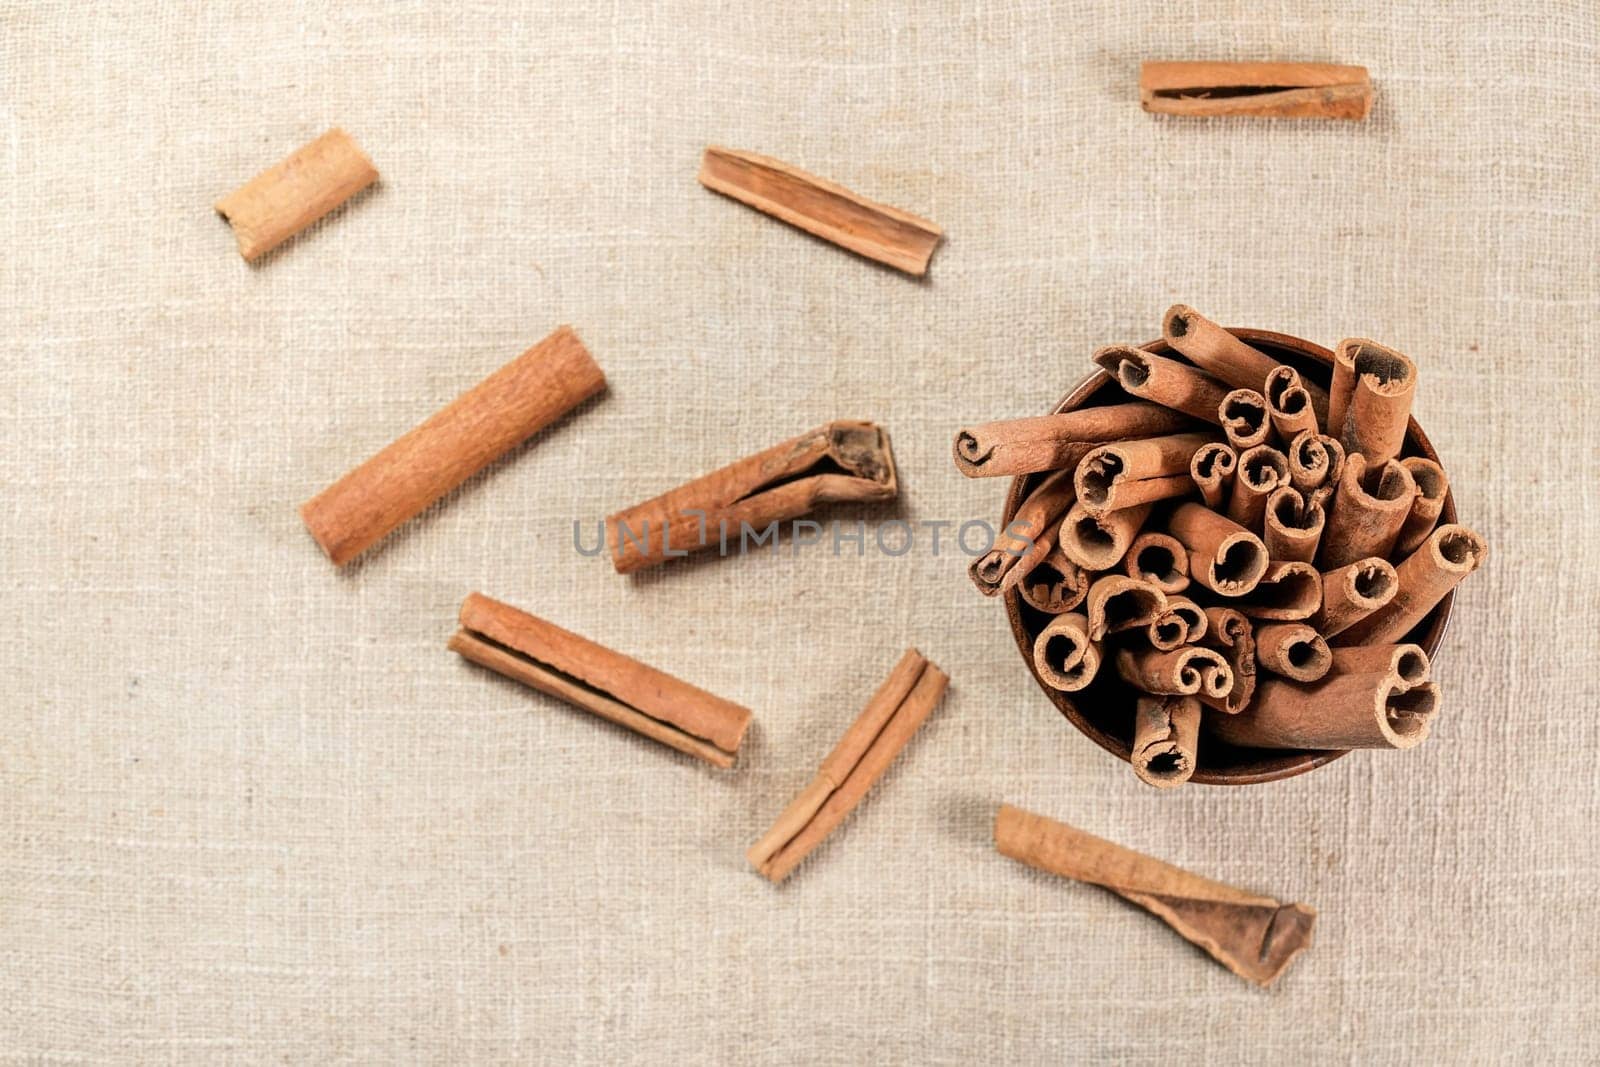 Closeup detail - Cinnamon bark sticks in small wooden cup, some scattered on linen tablecloth view from above by Ivanko